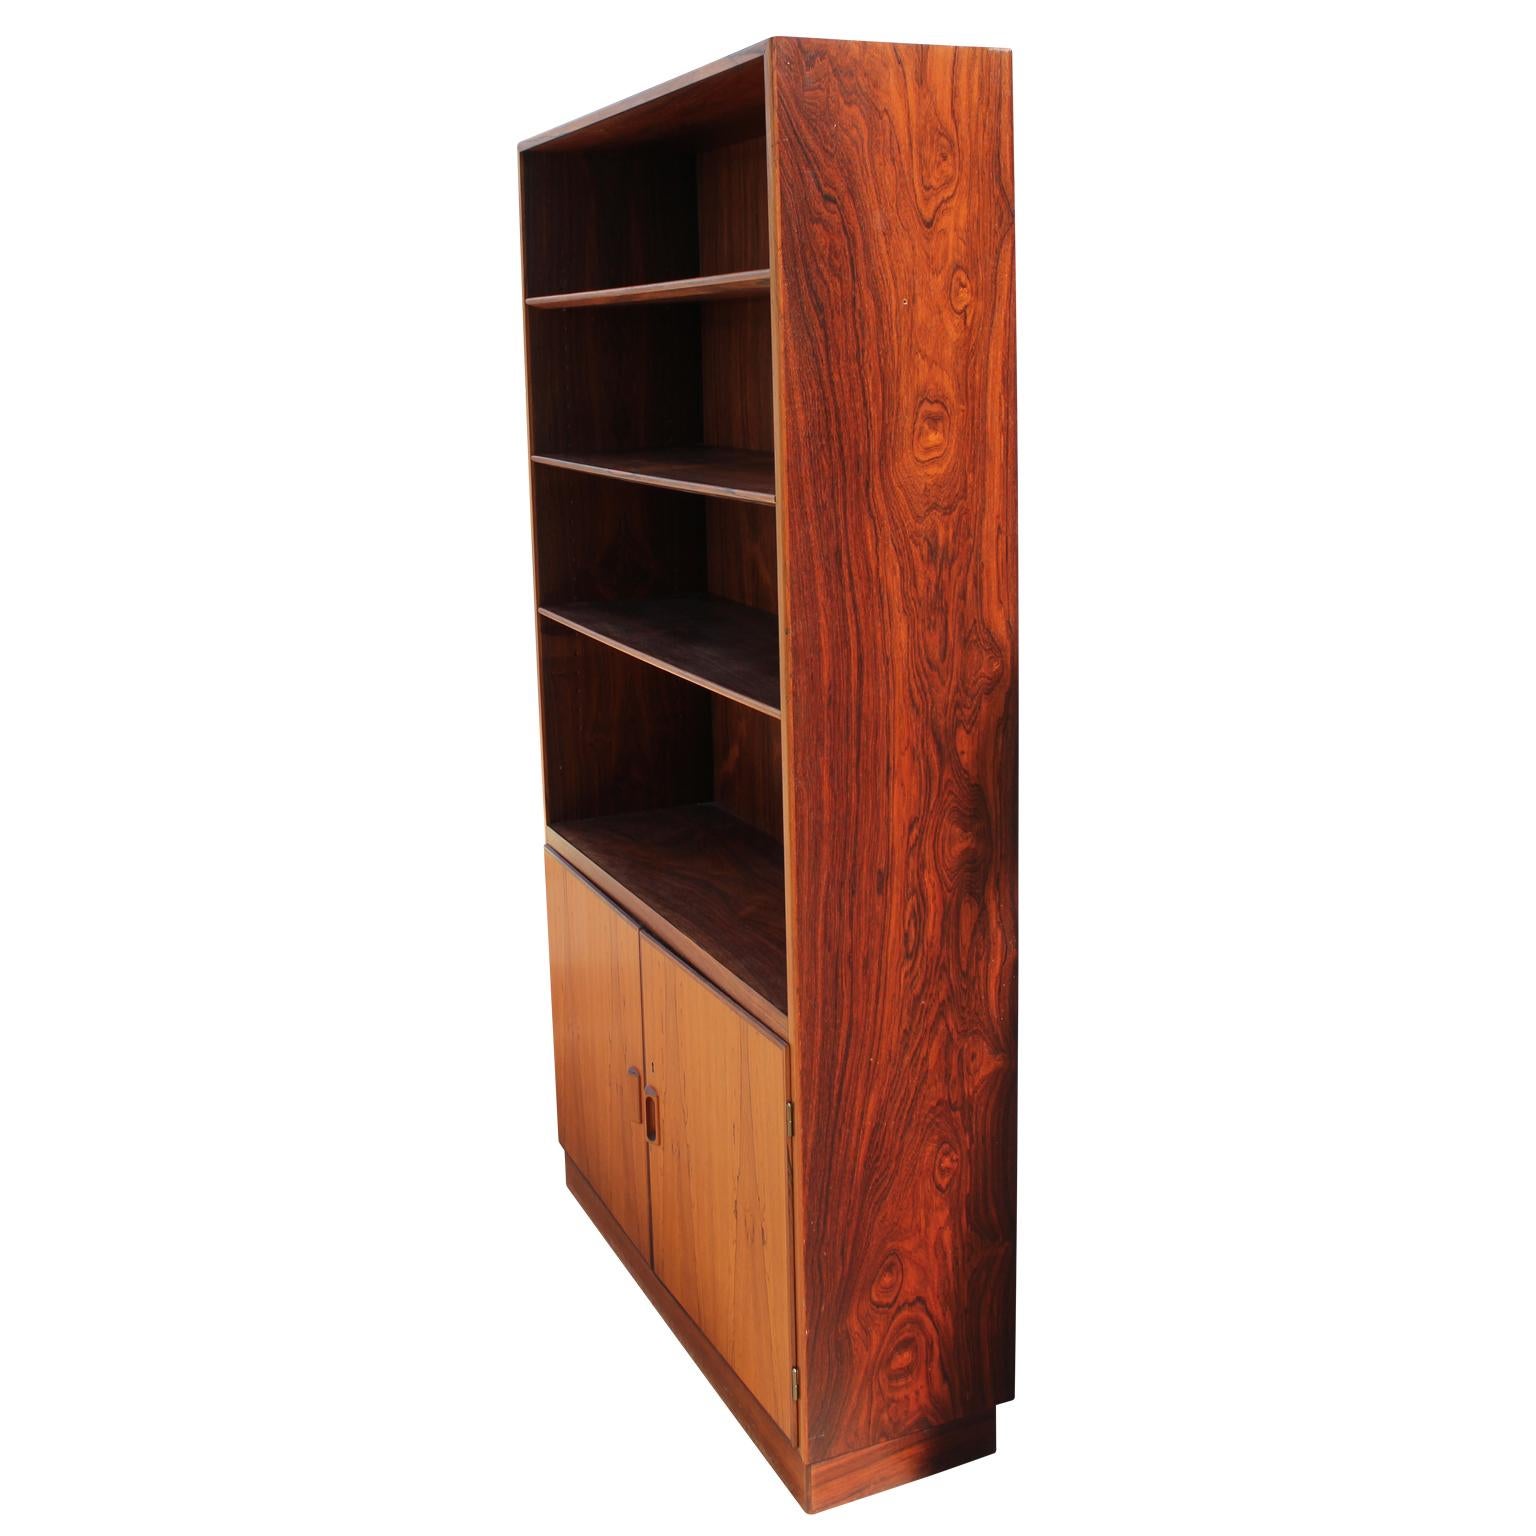 A Mid-Century Modern Danish bookcase made from gorgeous Brazilian rosewood featuring four shelves and cabinet space below that opens to reveal a single shelf by Søborg.